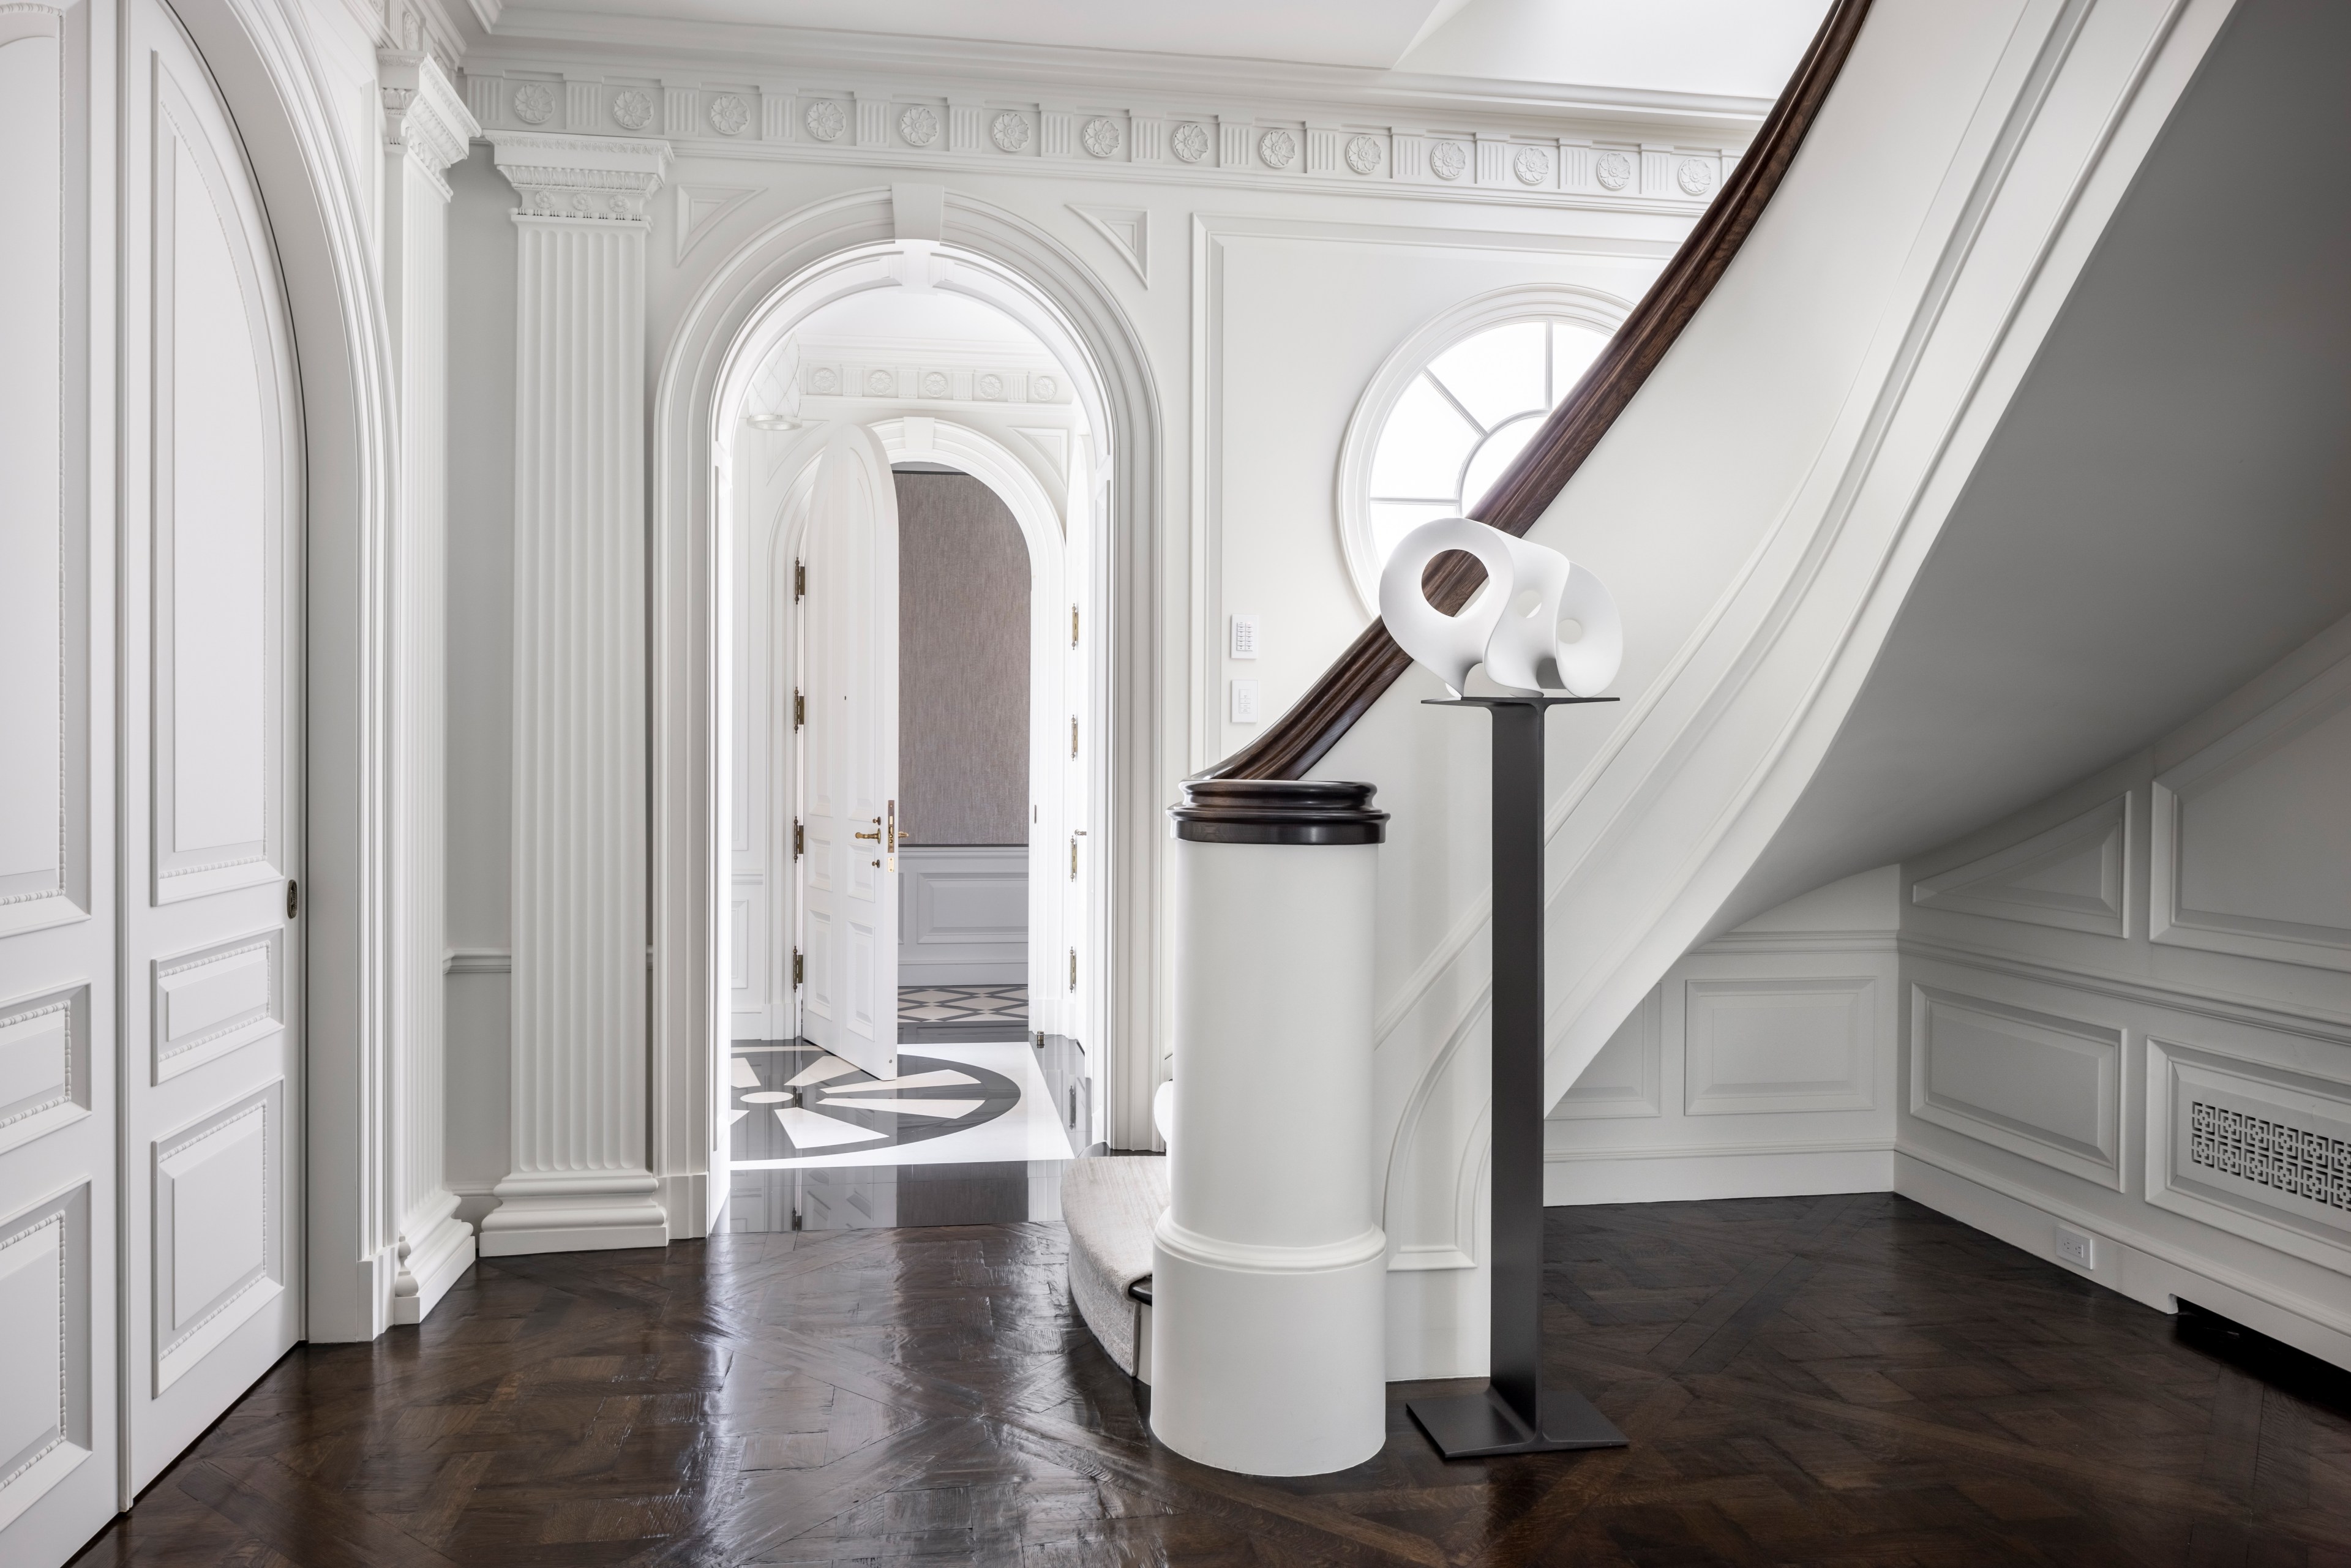 Arched doorways and paneled walls with columns carved into surfaces stand out in a hallway with a staircase.